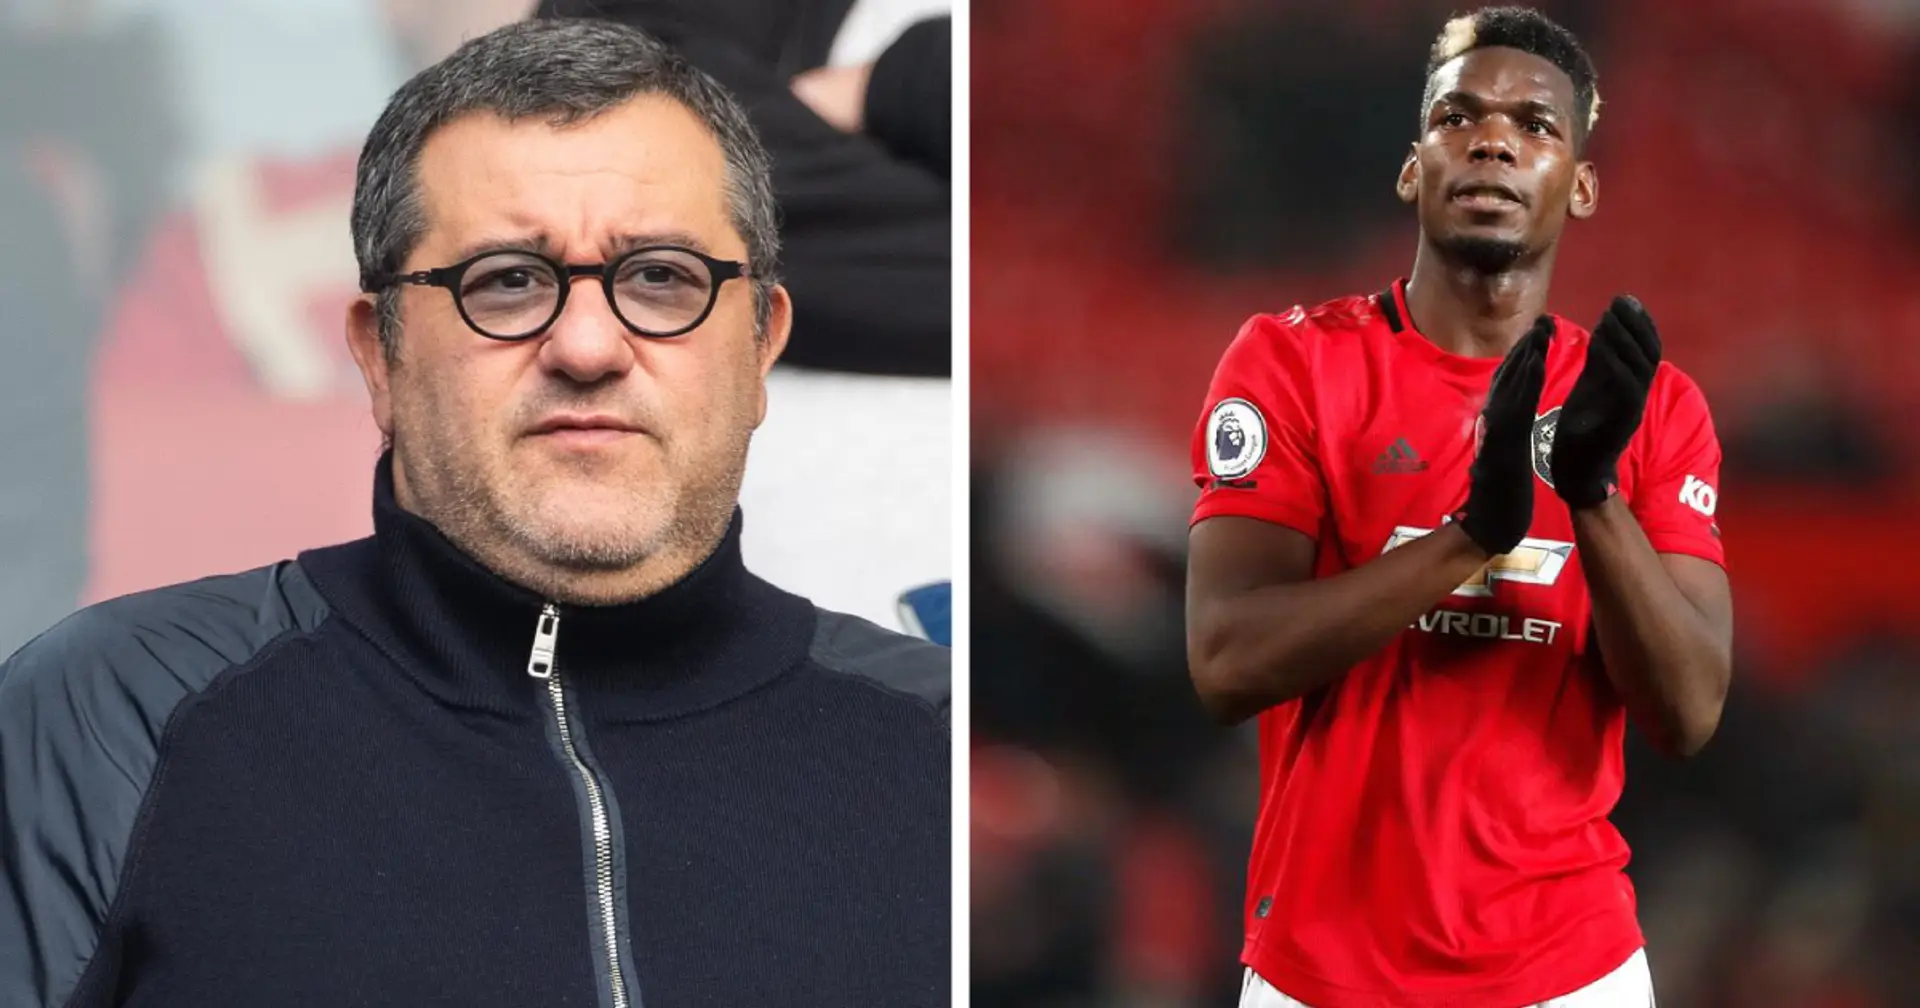 Mino Raiola 'intent' on moving Paul Pogba, player willing to stay at Man United